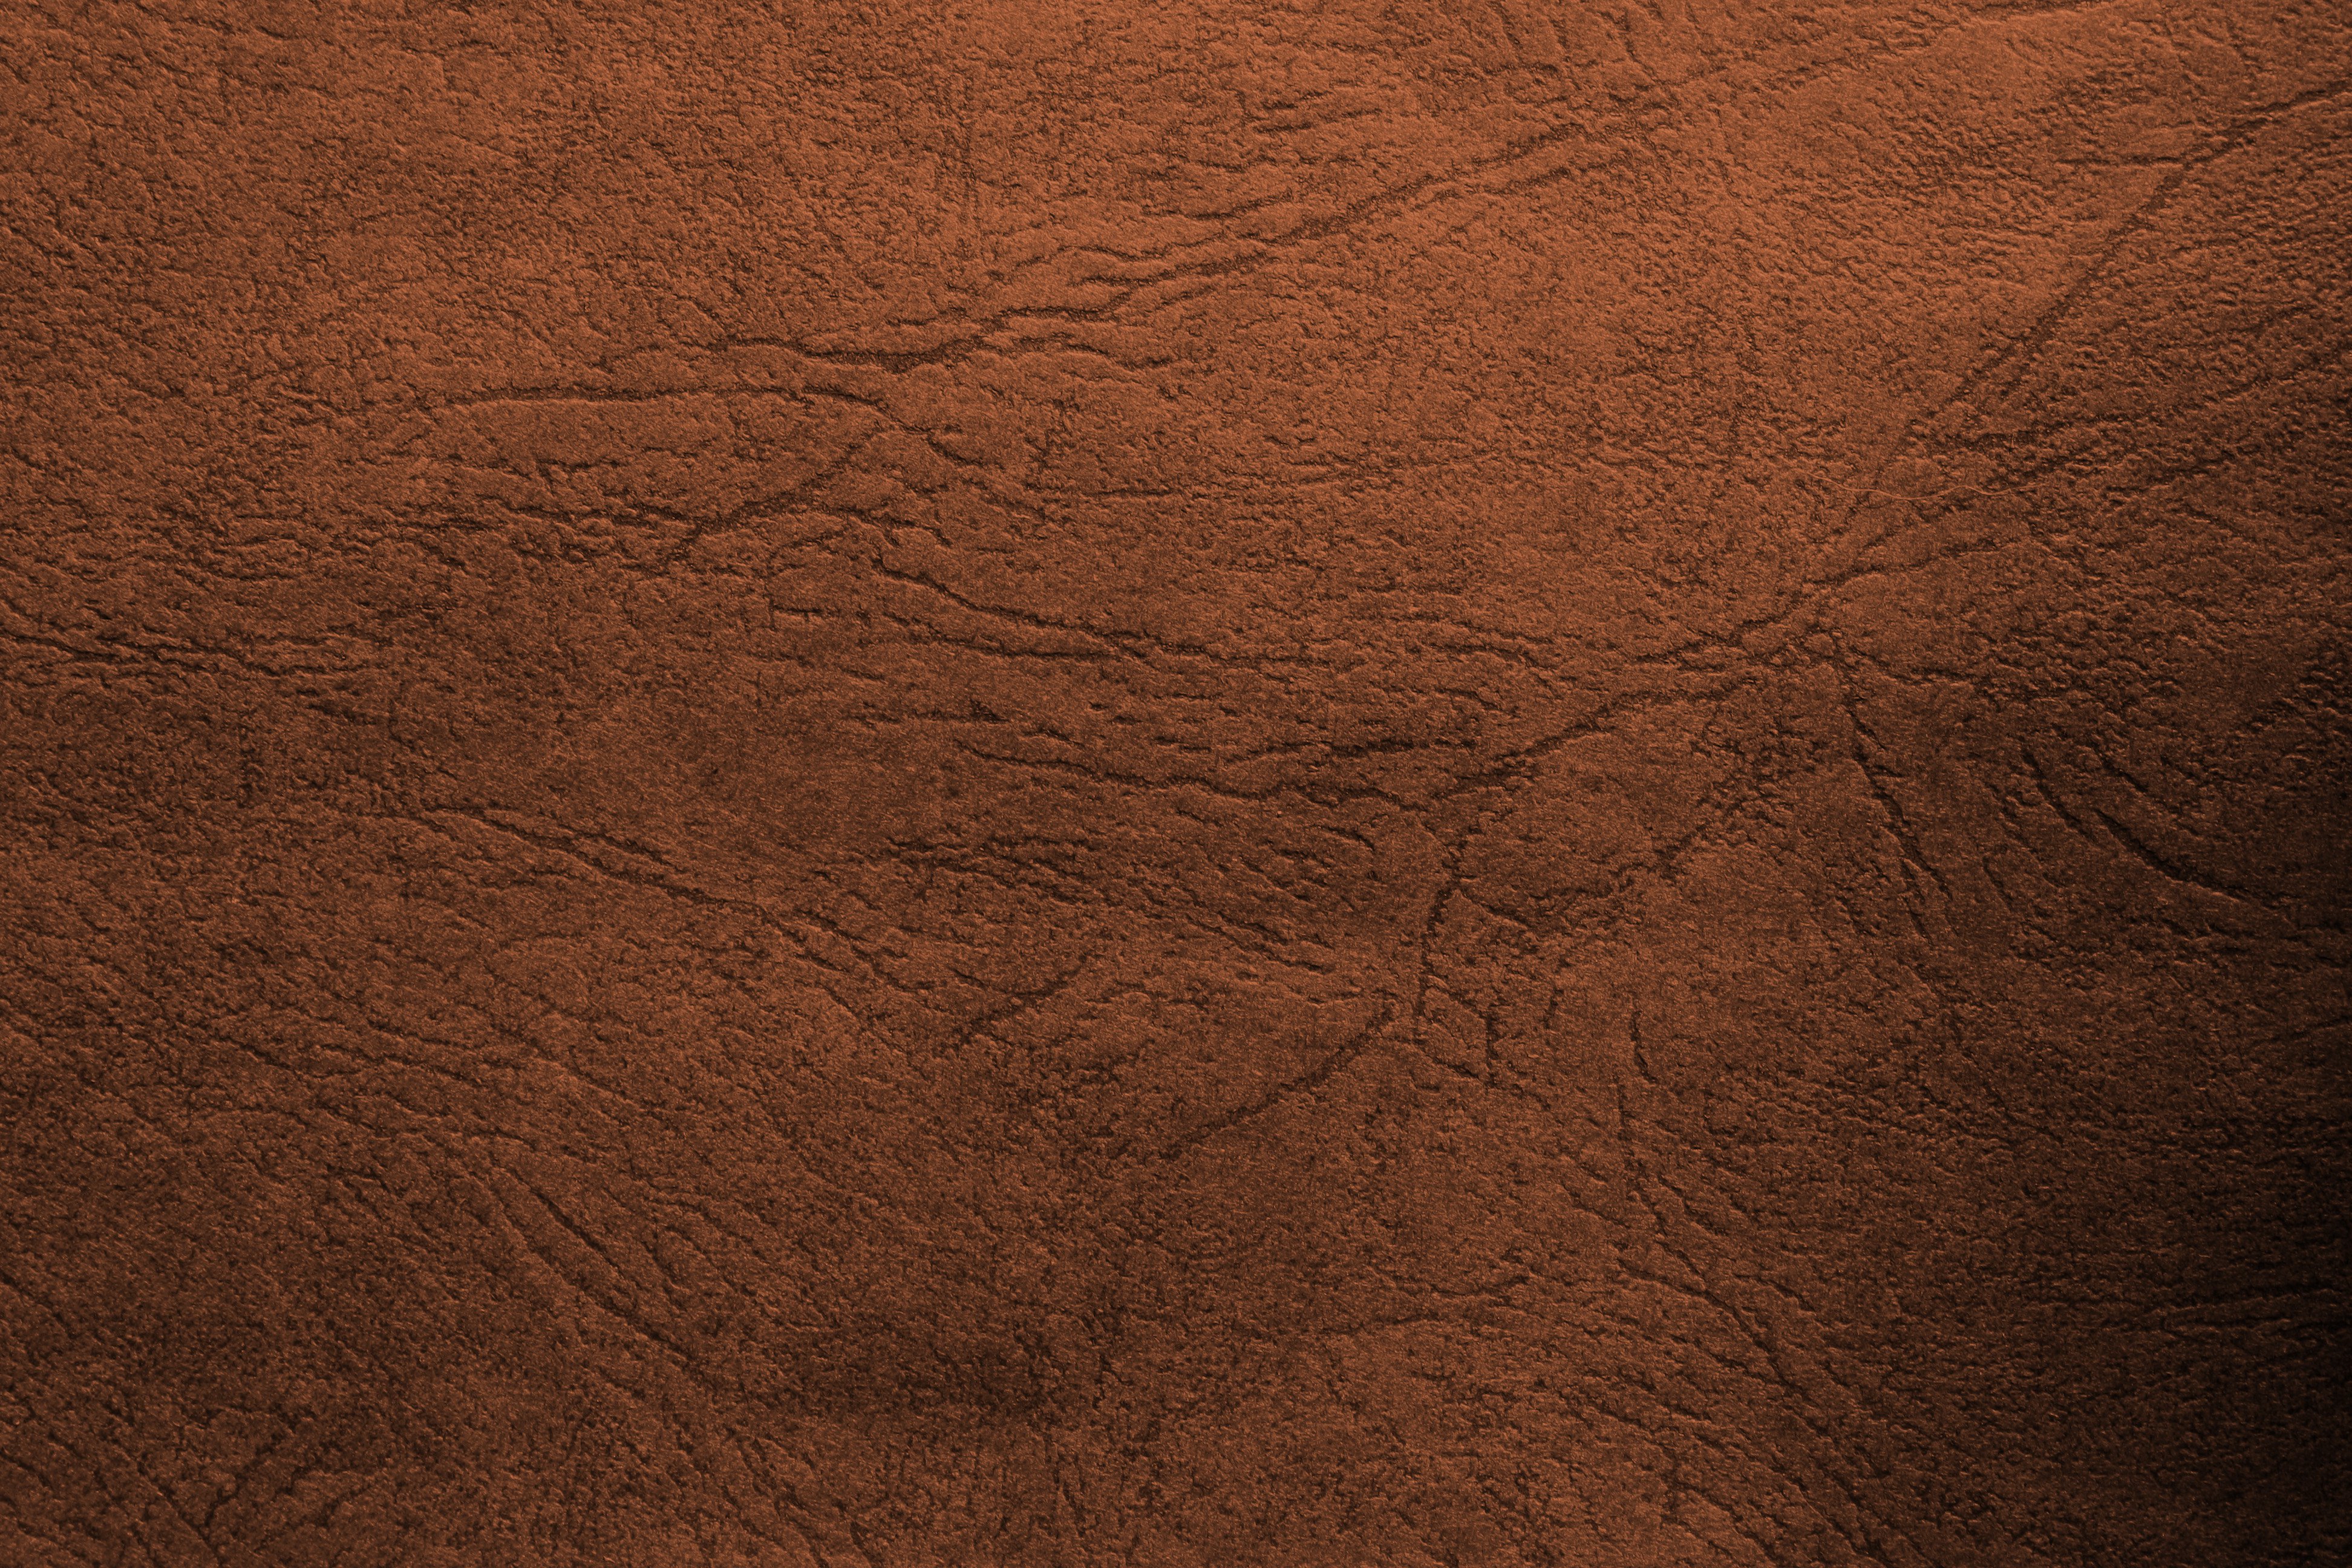 Brown Leather Texture   Free High Resolution Photo   Dimensions 3888